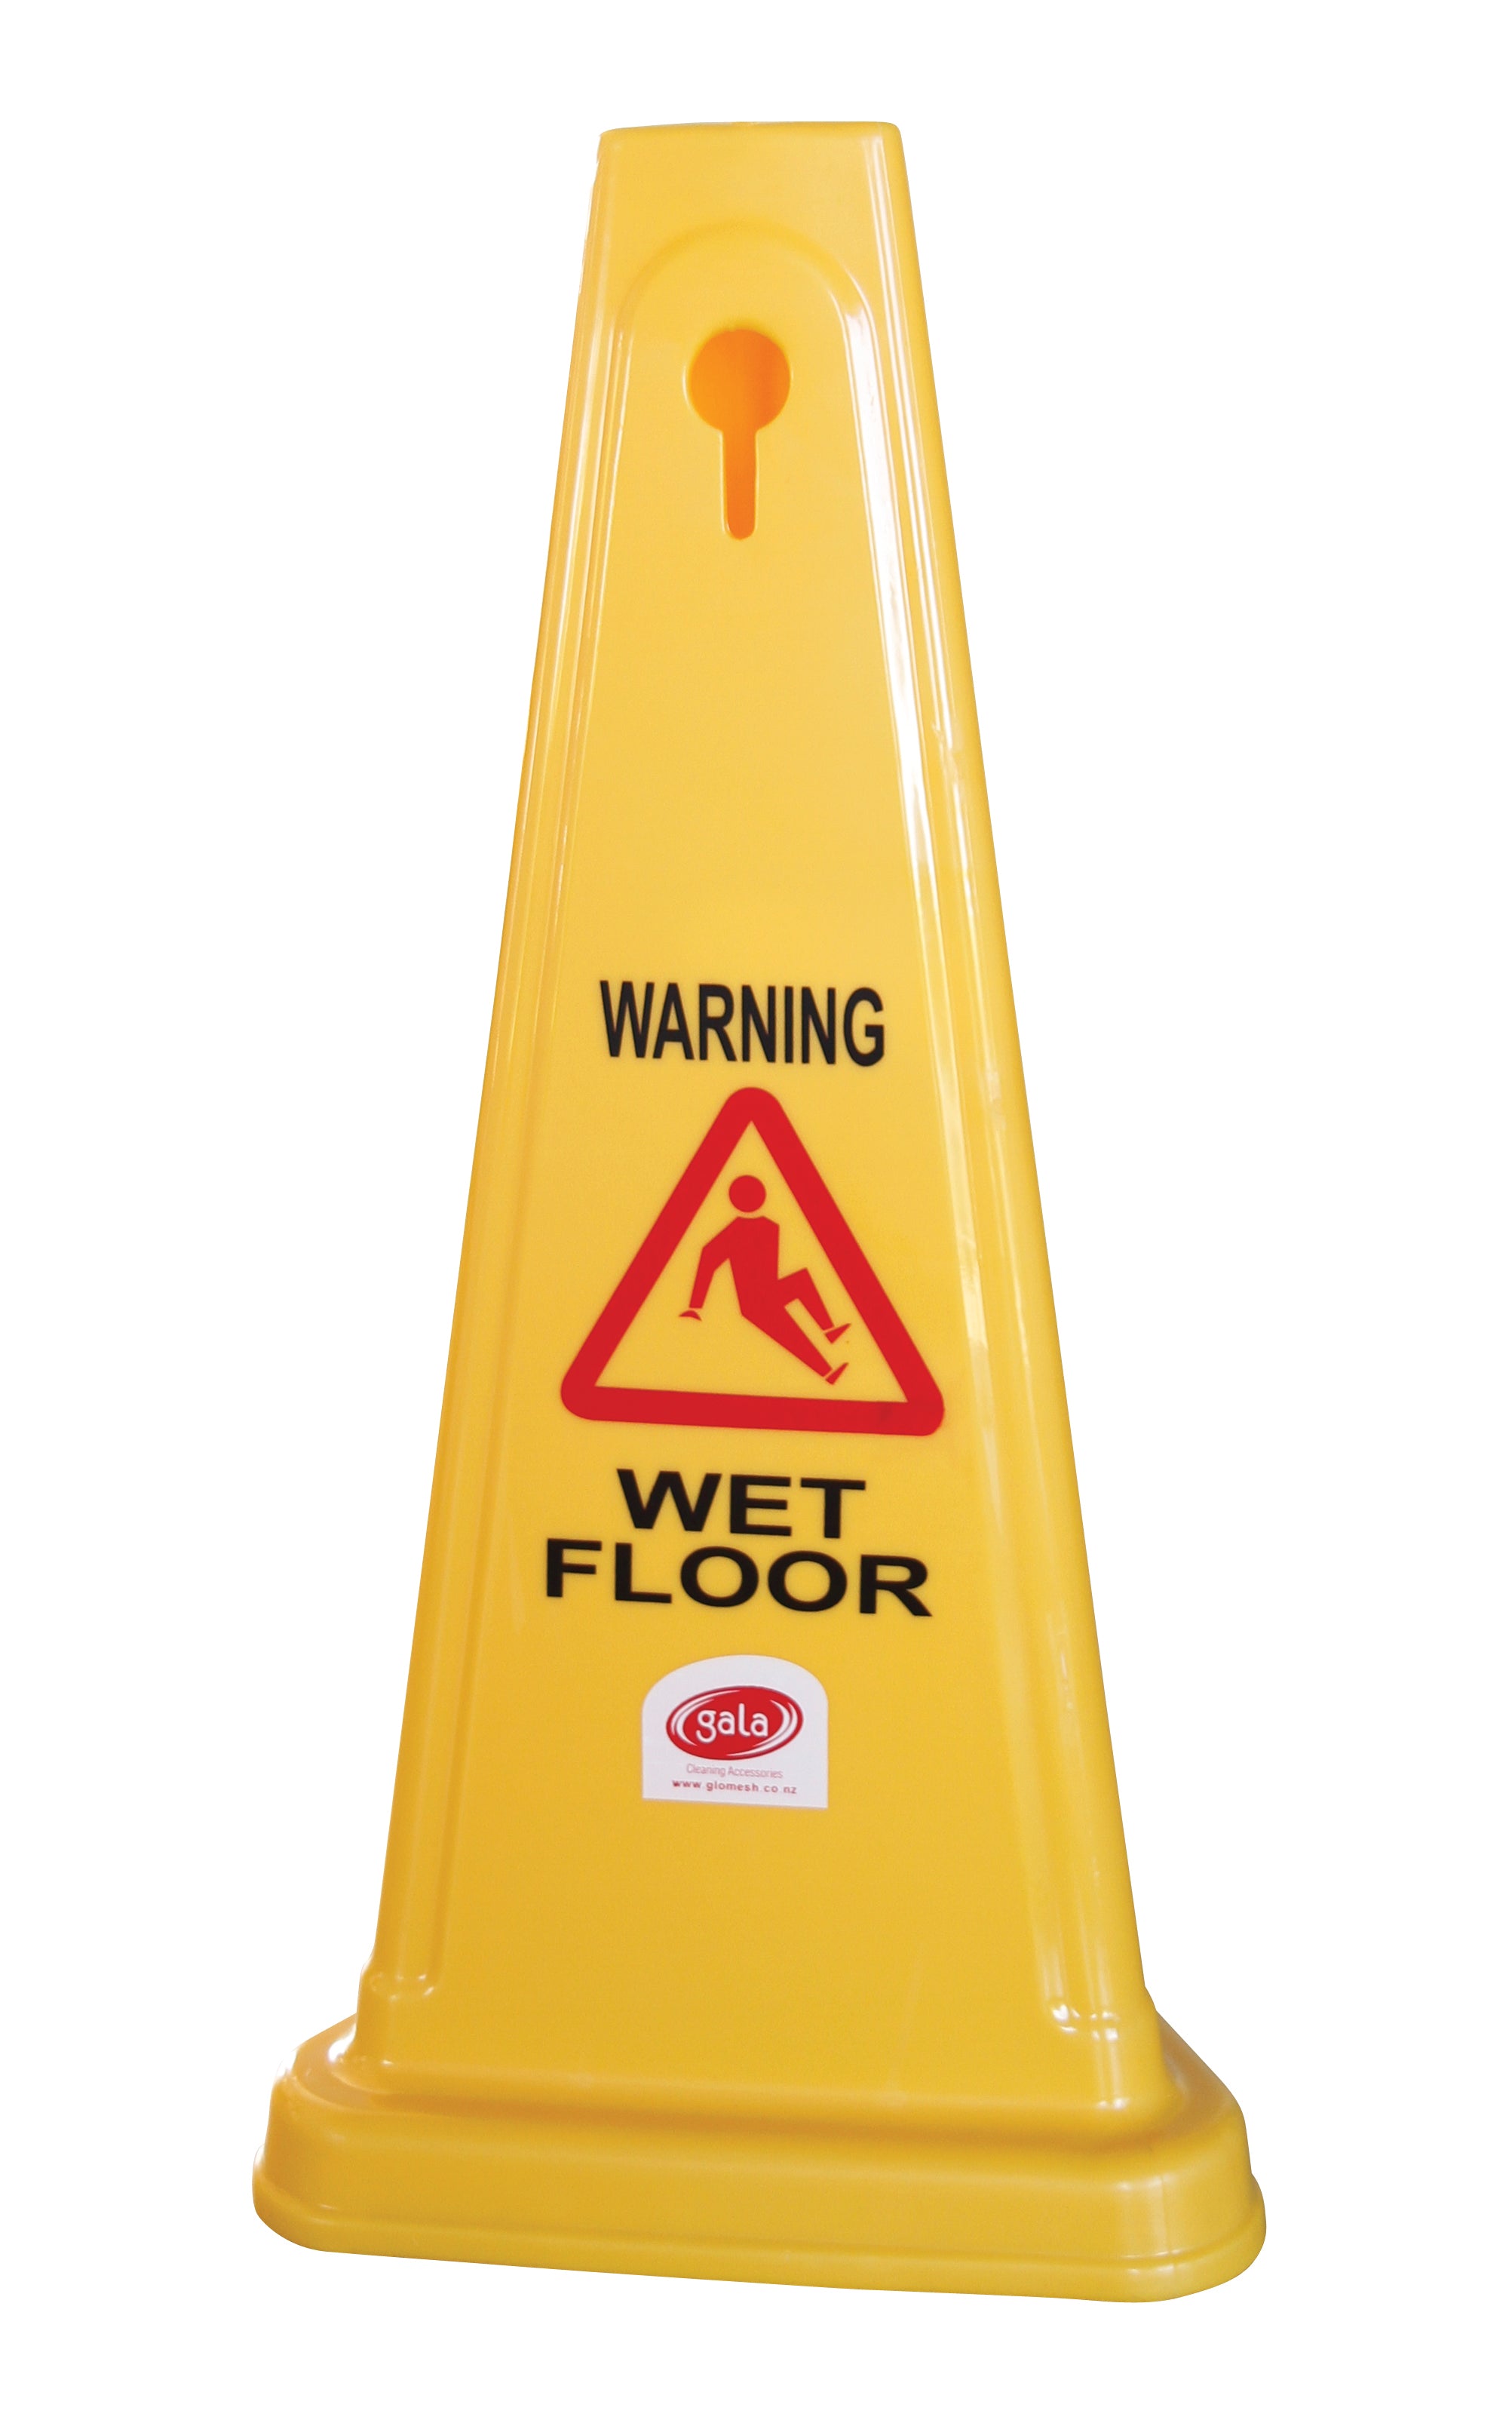 GALA SAFETY CONE - "WET FLOOR" YELLOW 680MM